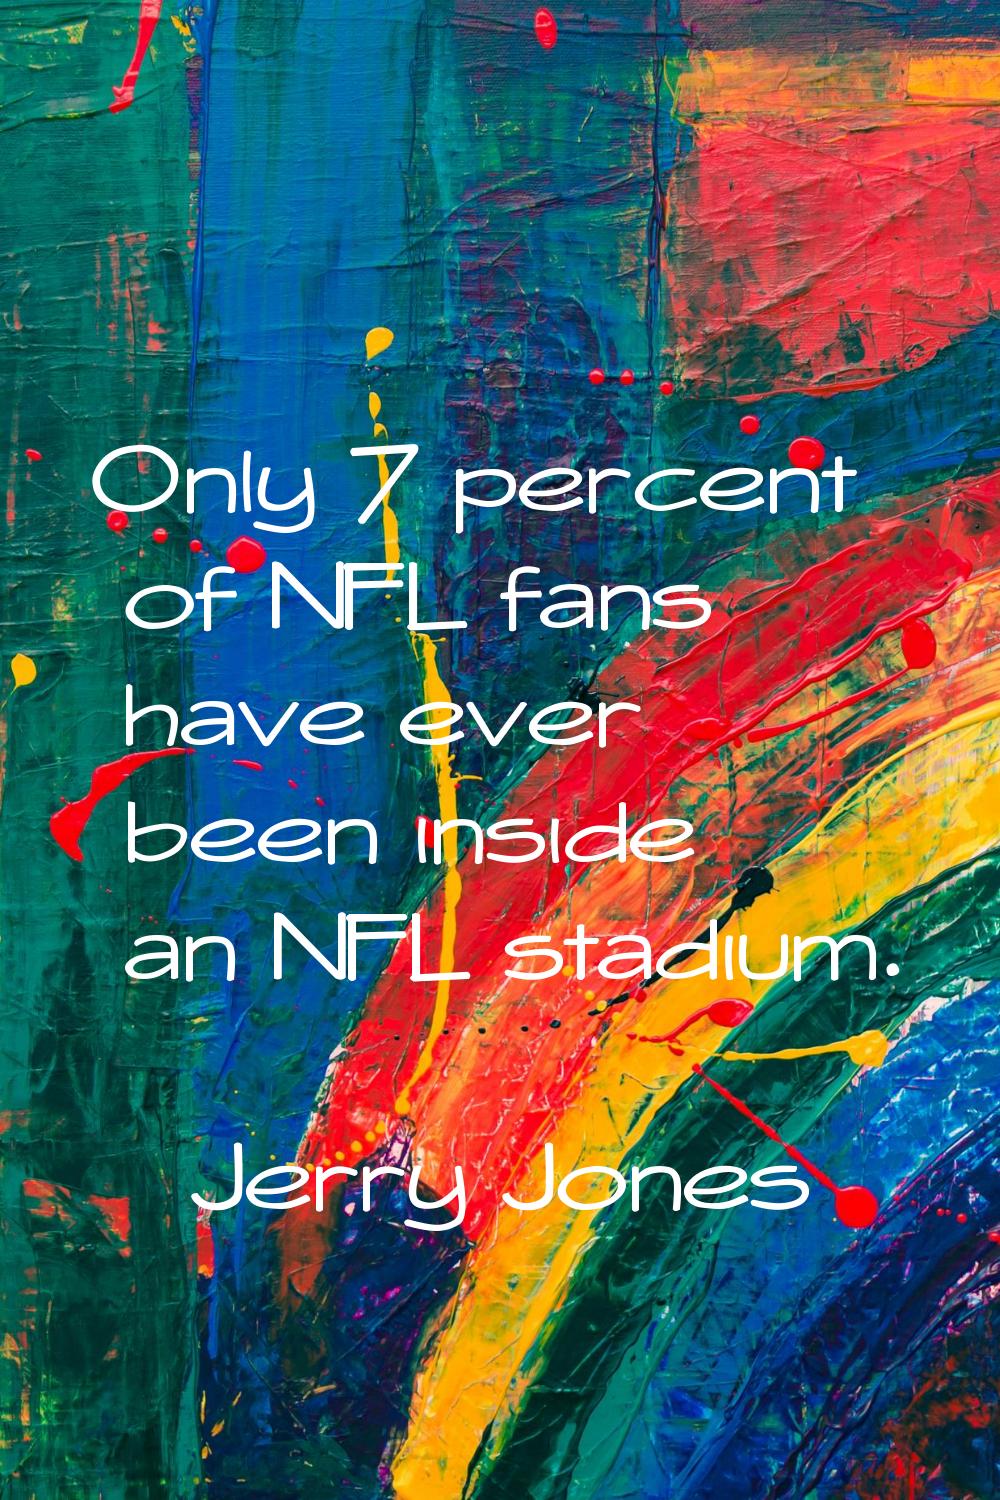 Only 7 percent of NFL fans have ever been inside an NFL stadium.